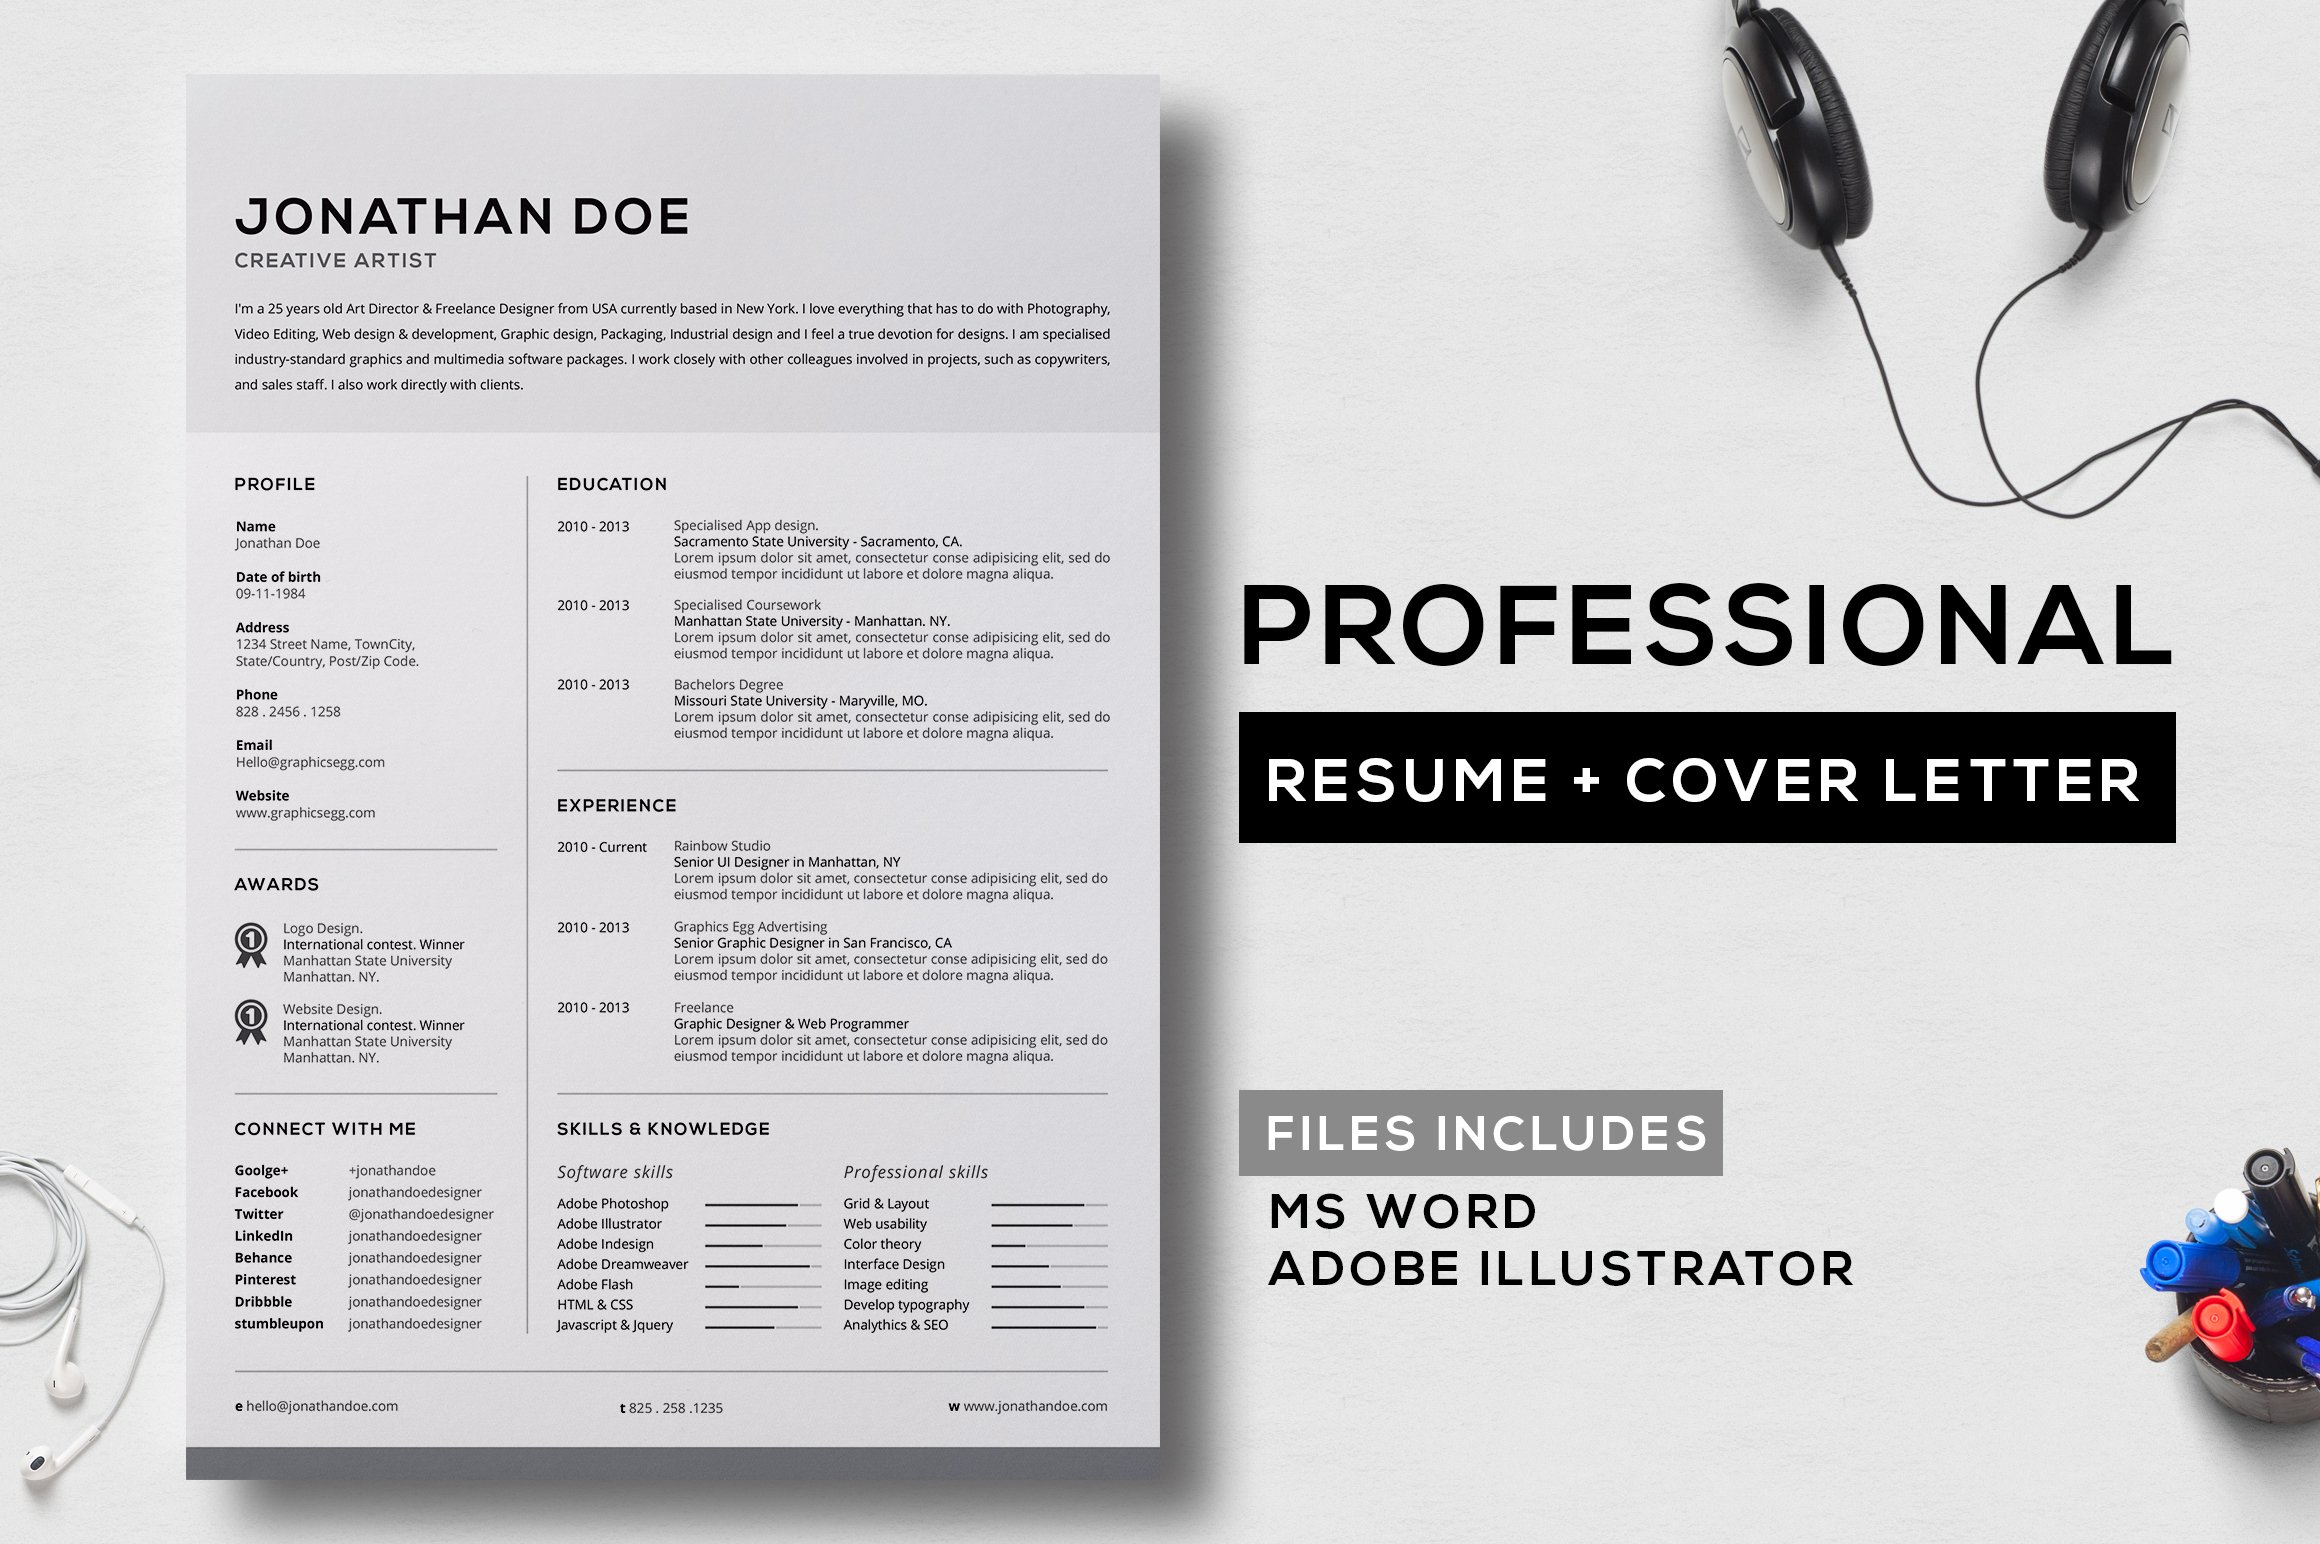 Professional Resume + Cover Letter 6 cover image.